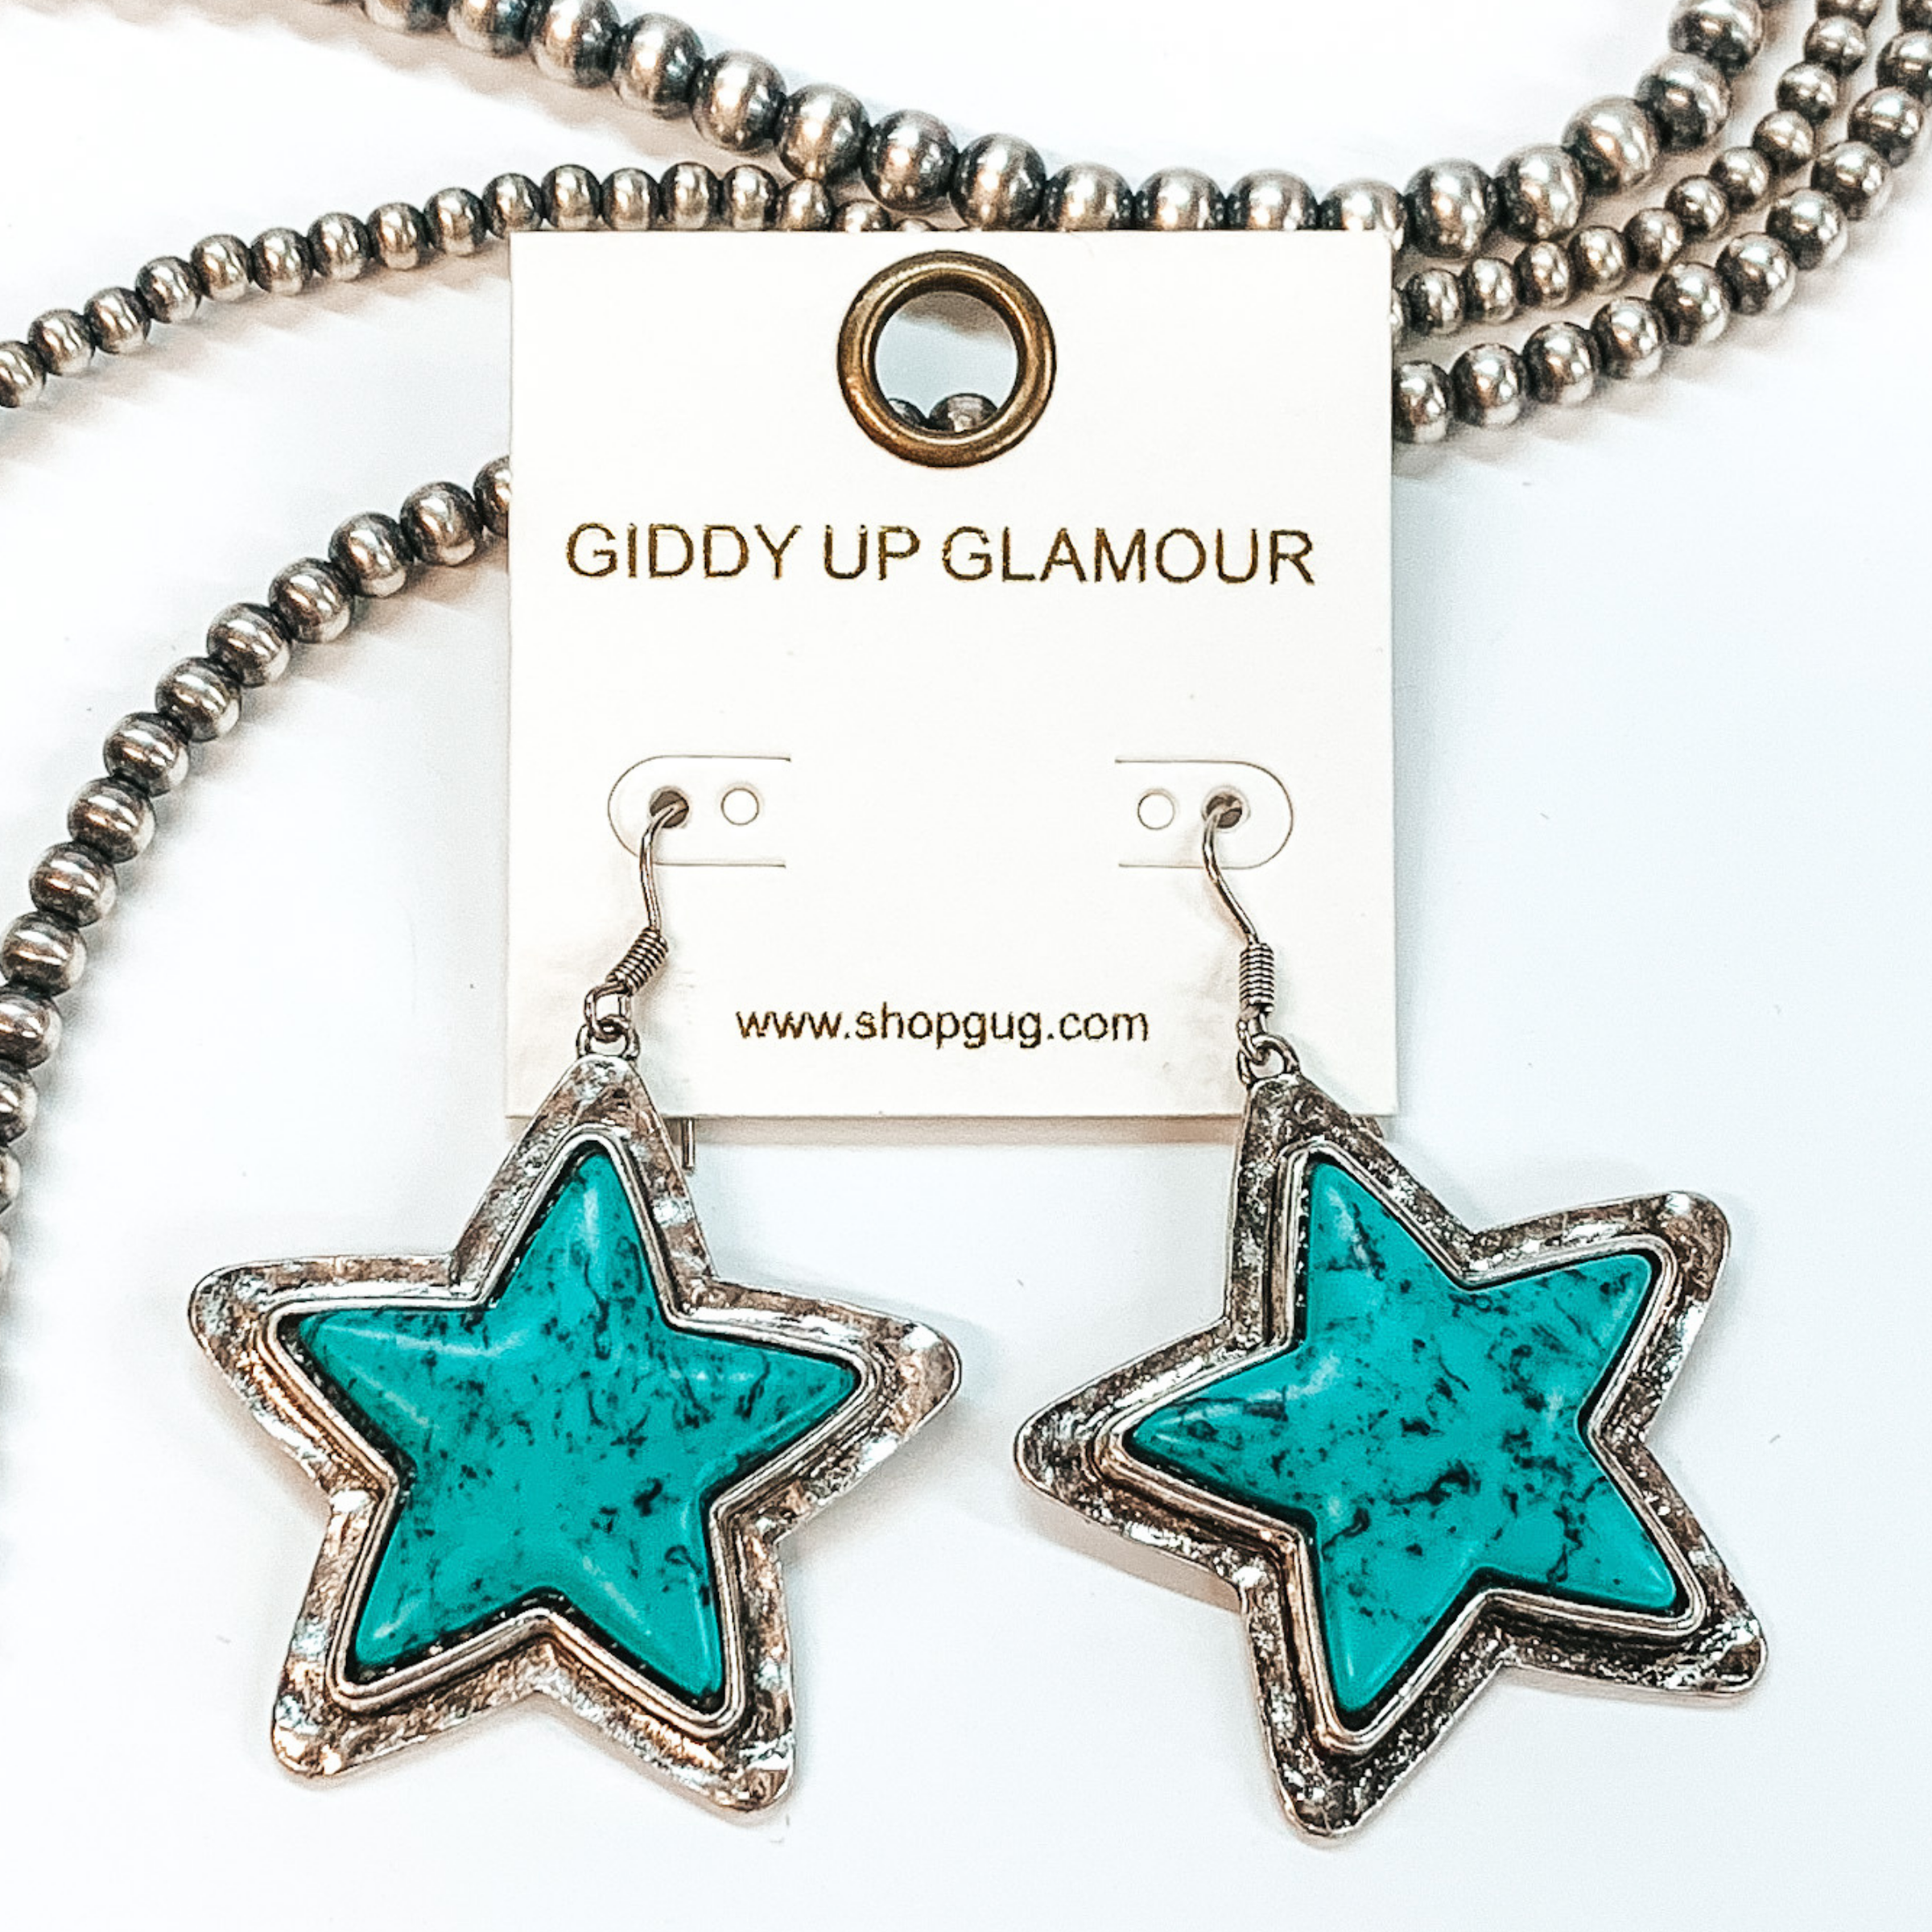 Turqouise stone star dangling earrings with silver outline, pictured on a white background and beaded decor.  